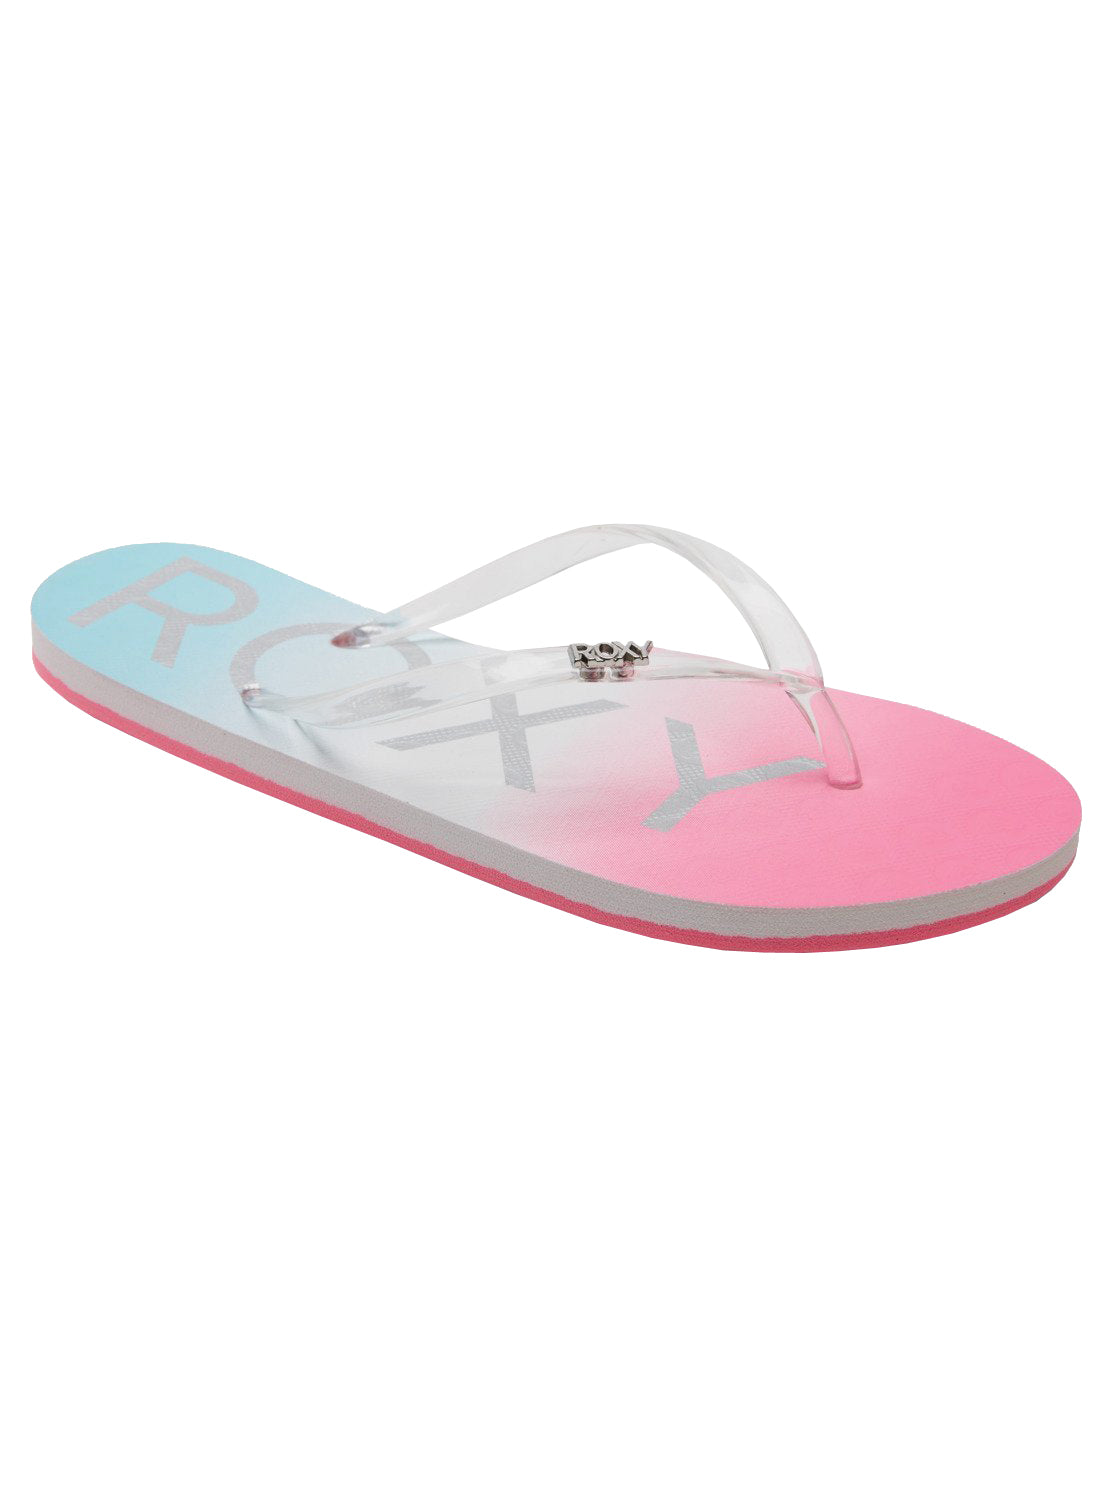 Roxy Viva Jelly Womens Sandal WCQ-White-Crazy Pink-Turquoise 6